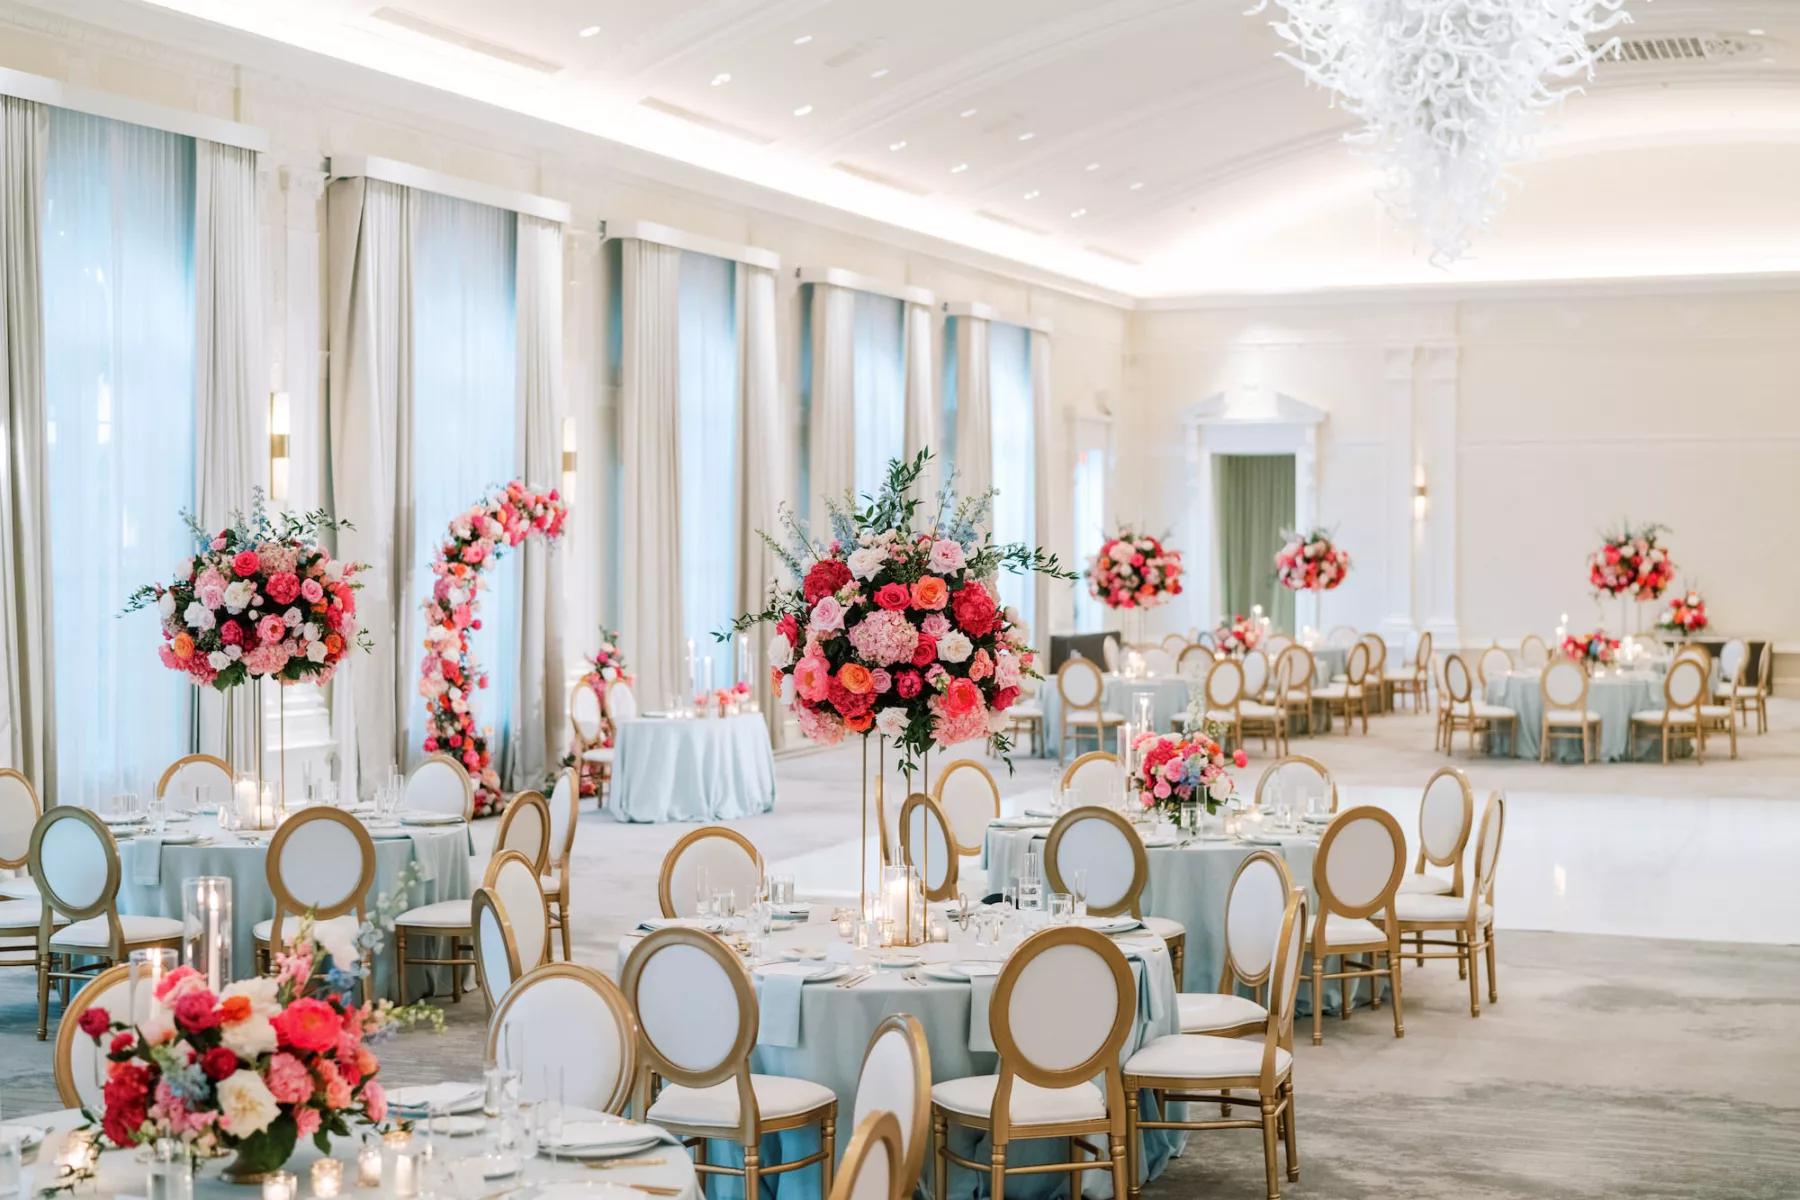 Luxurious Pink and Blue Summer Ballroom Wedding Reception Decor Ideas | Tall Flower Stand with Pink Anemones and Hydrangeas, Orange Garden Roses, Blue Stock Flowers | Elegant Gold and White Chairs | Tampa Bay Florist Bruce Wayne Florals | Kate Ryan Event Rentals | Planner Parties A La Carte | Venue The Vinoy 